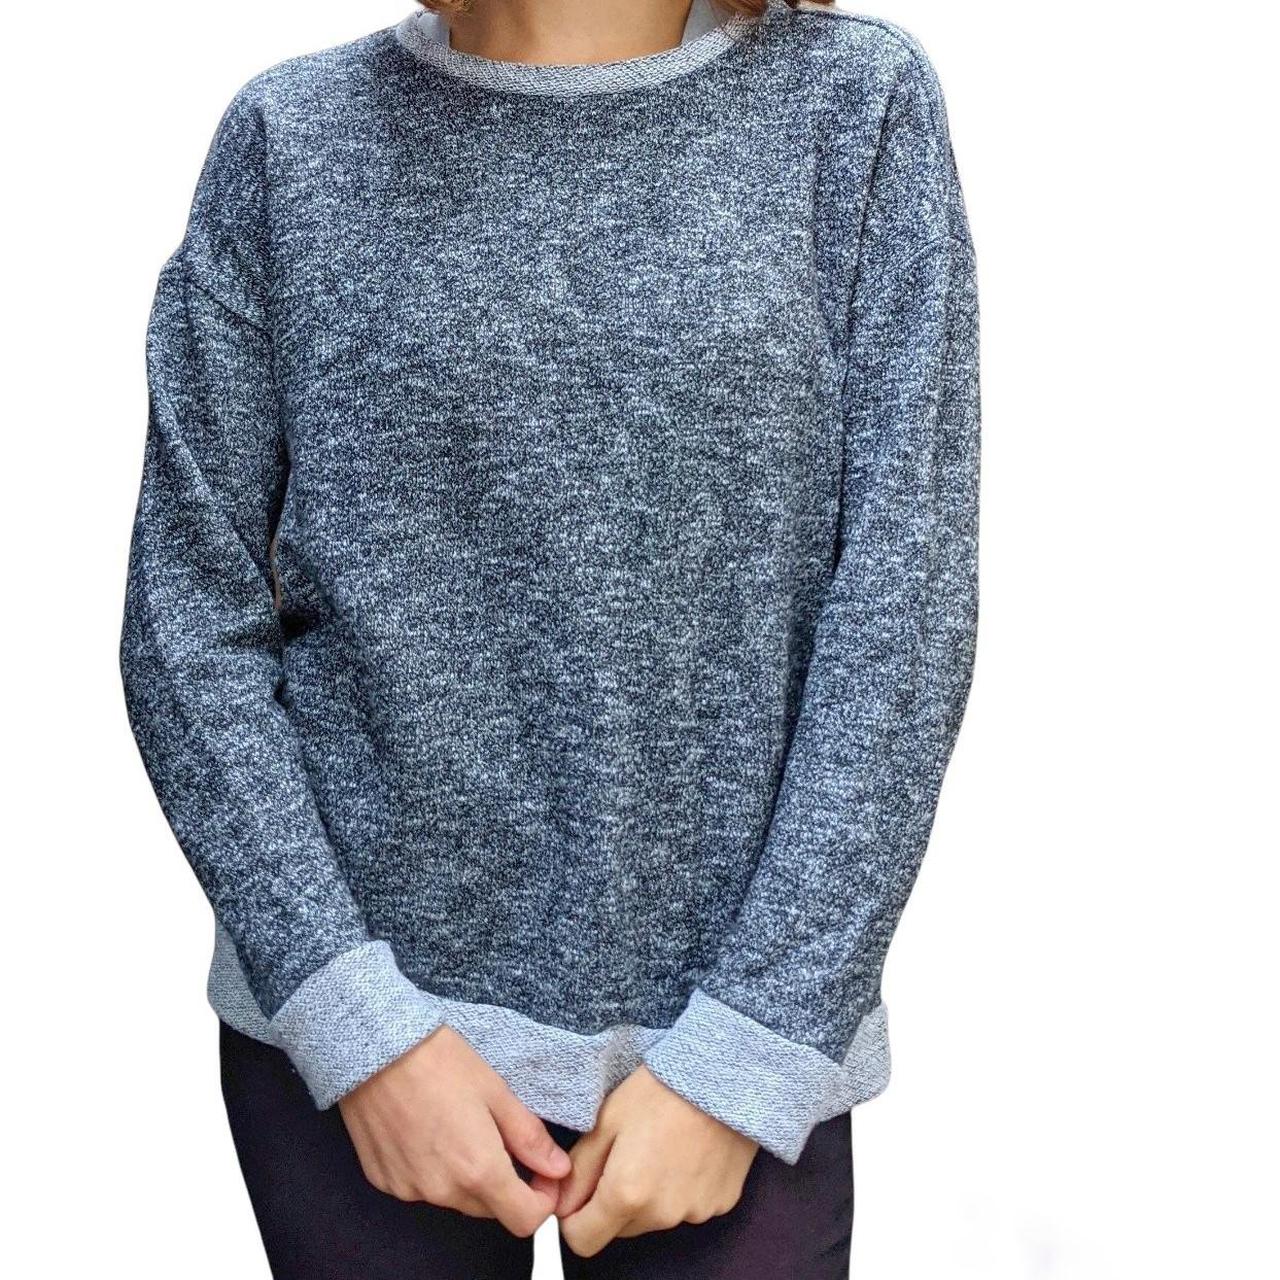 Product Image 3 - Grey Sweater 🧶

Very cute knit